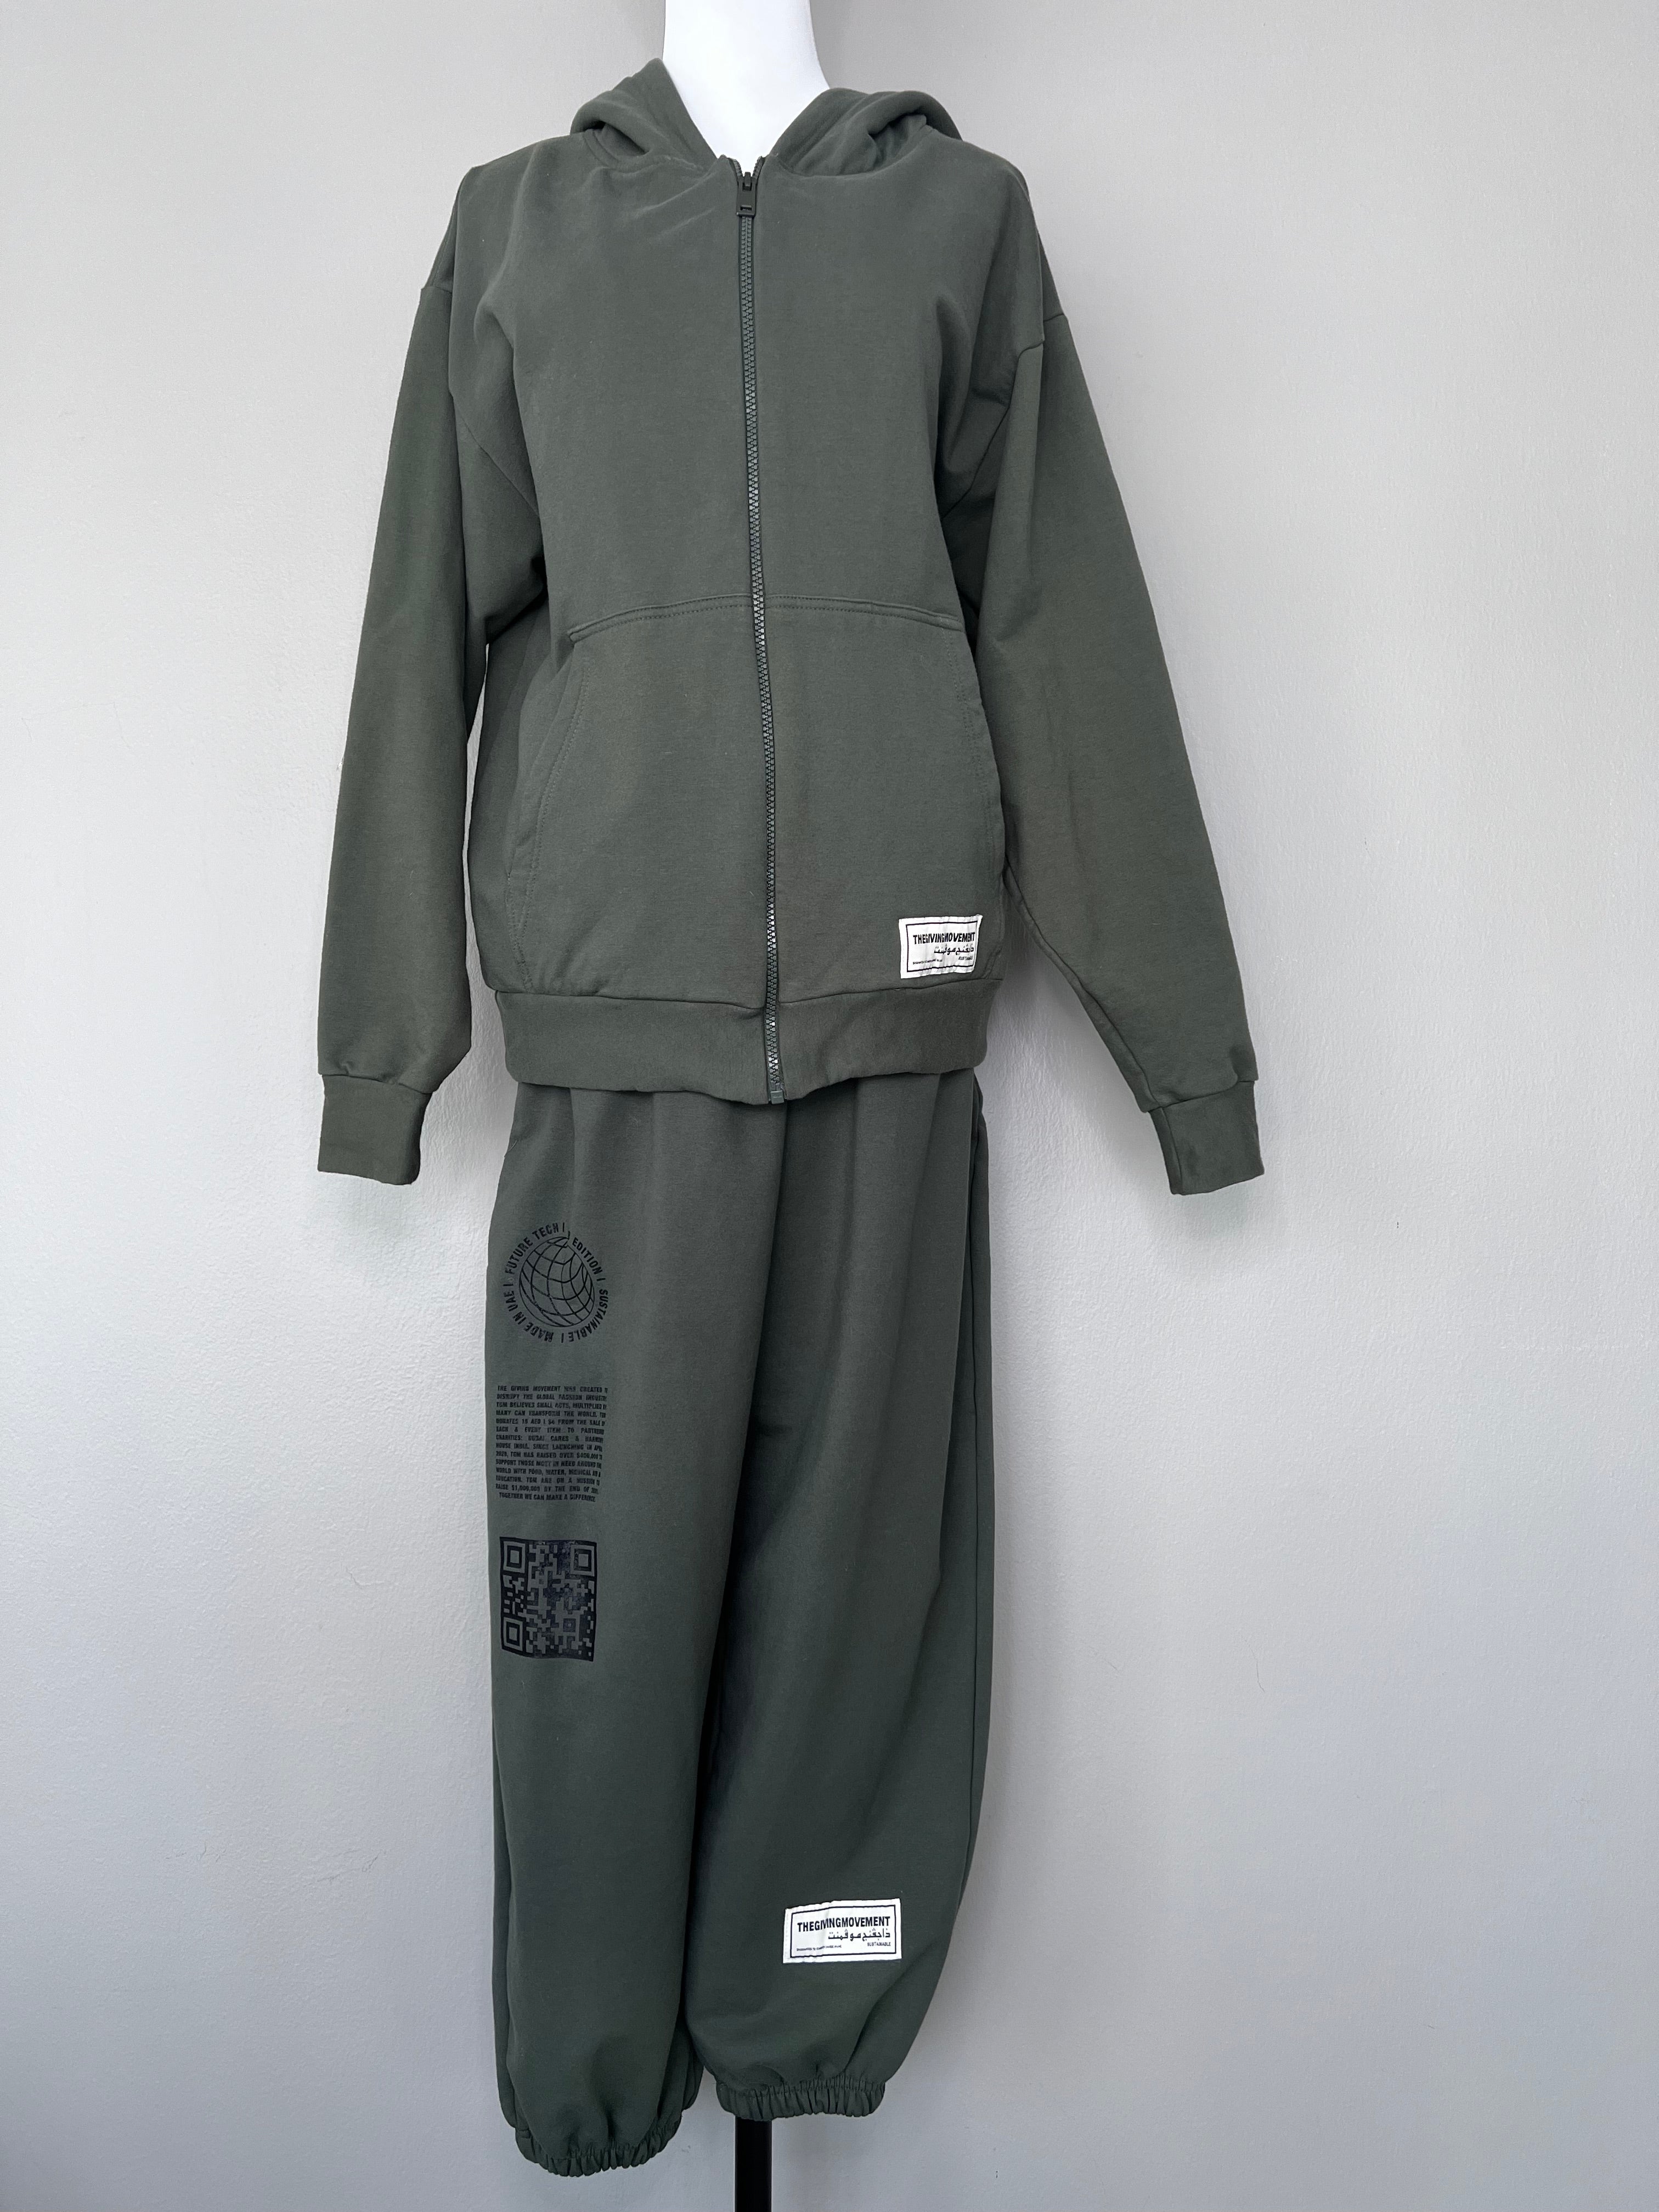 BRAND NEW!Army green thick sweatpants with logos - THEGIVINGMOVEMENT